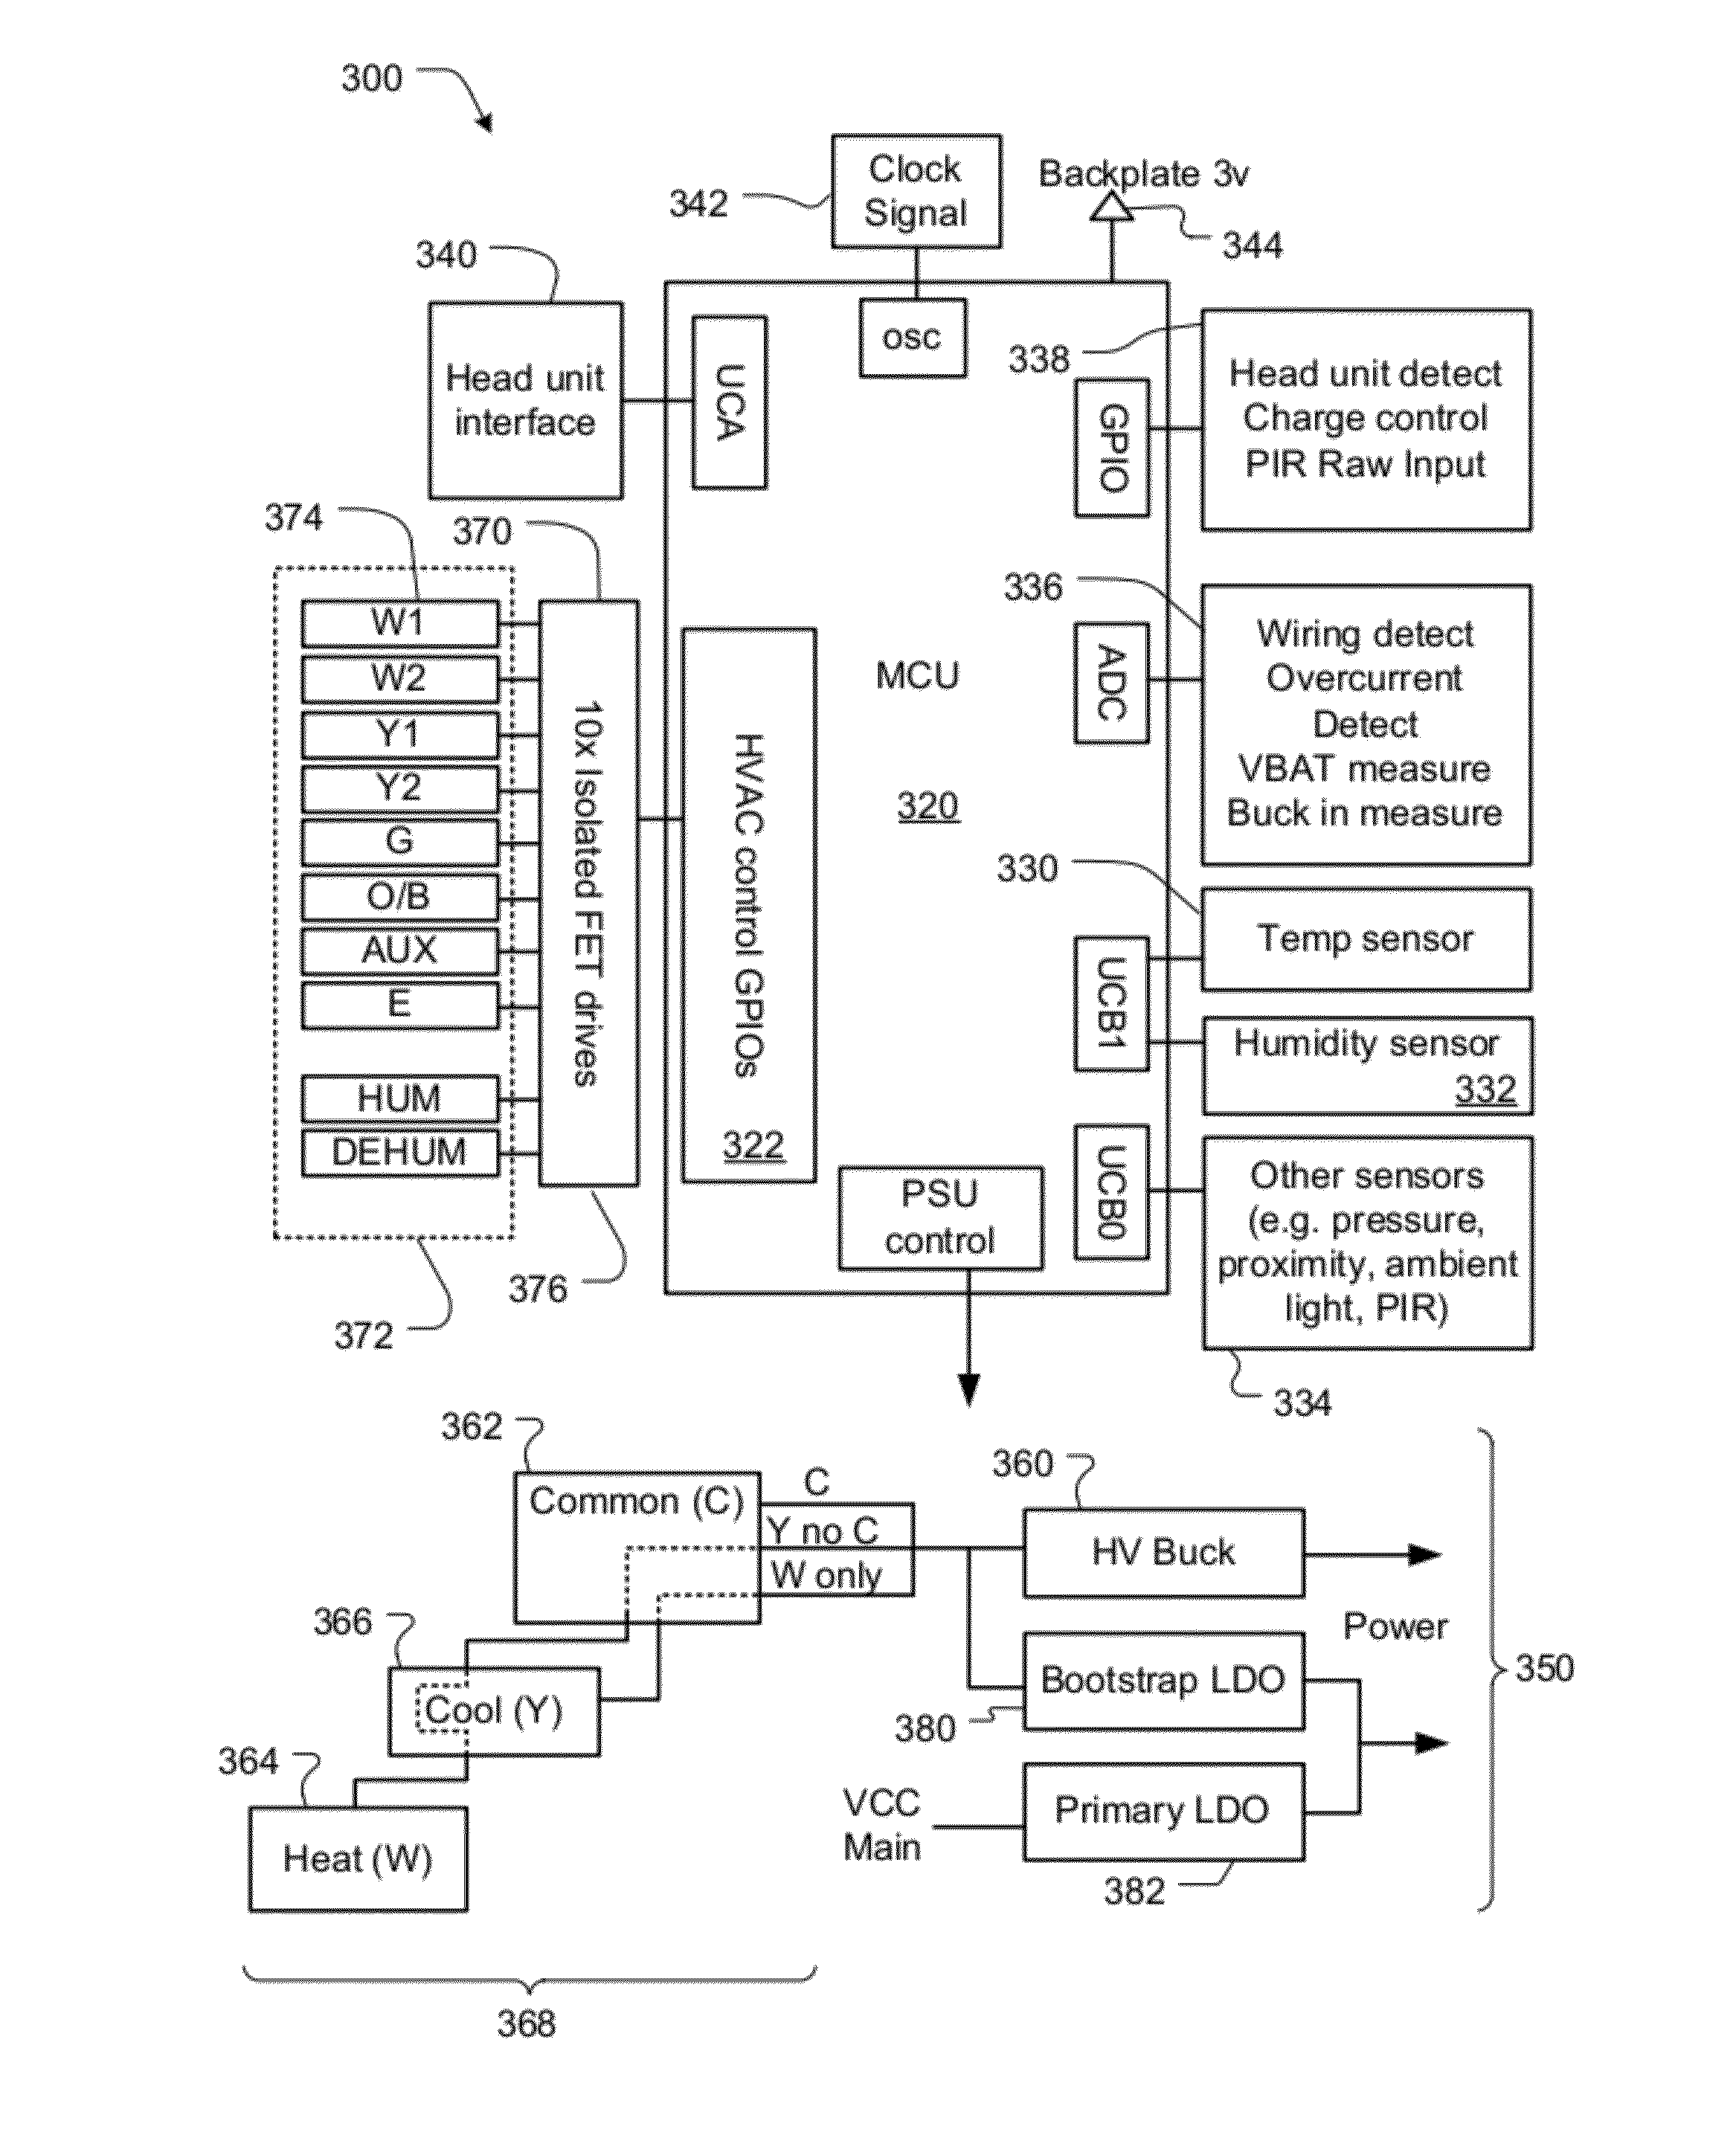 Power-preserving communications architecture with long-polling persistent cloud channel for wireless network-connected thermostat